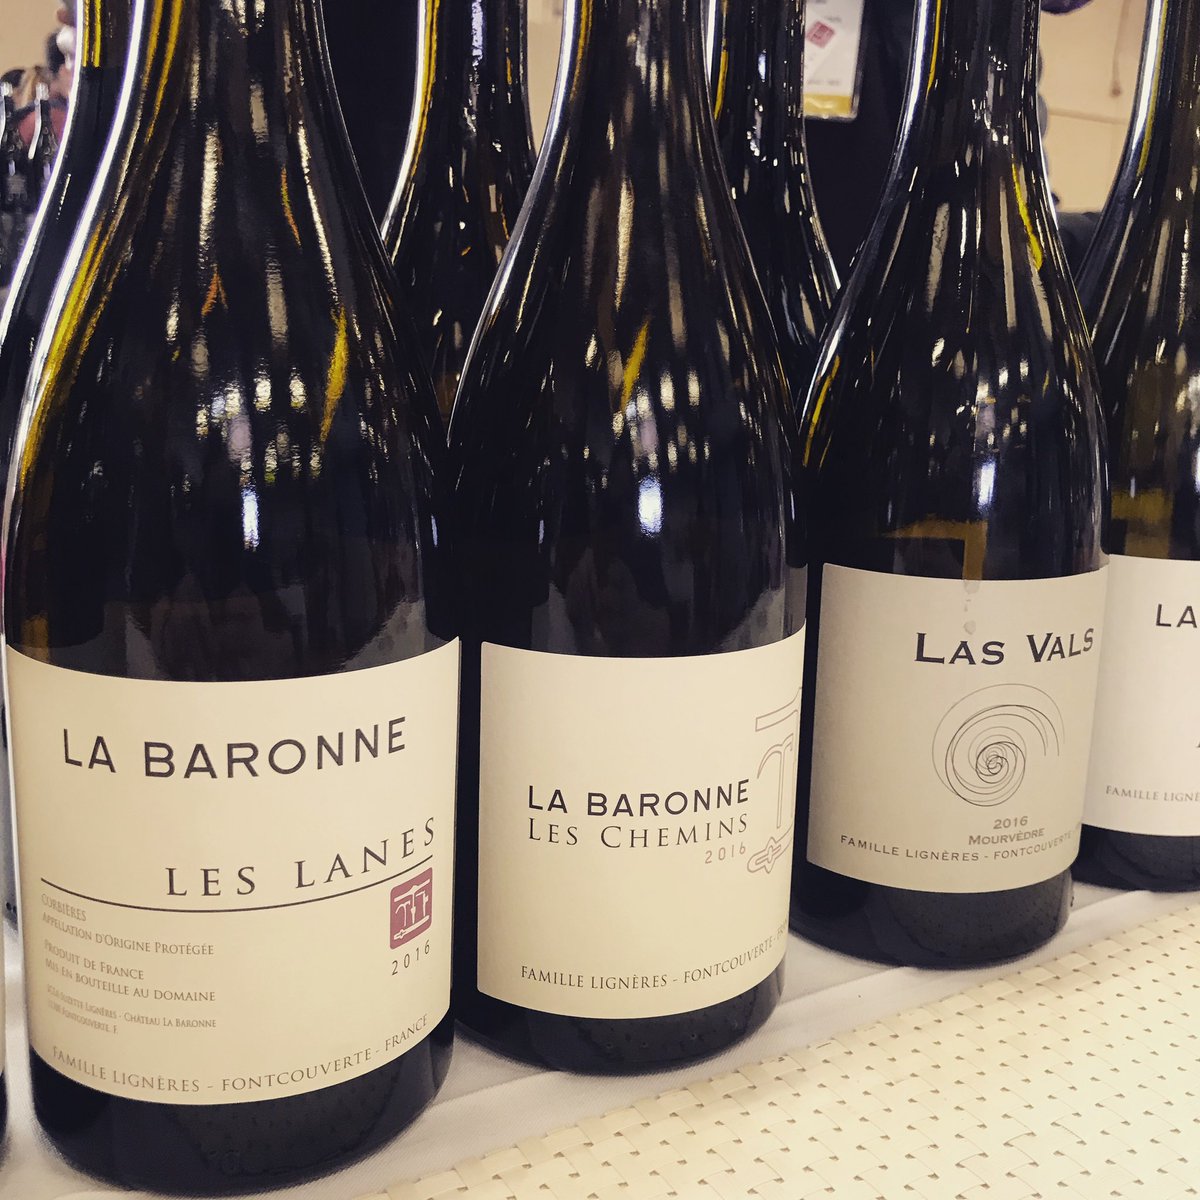 Our last stop at MillesimeBio had to be Chateau La Baronne with their delicious range of wines. #millesimebio2019 #NothingButTheGrape #RedWines #OrganicWine #DeliciousWine #LastStop